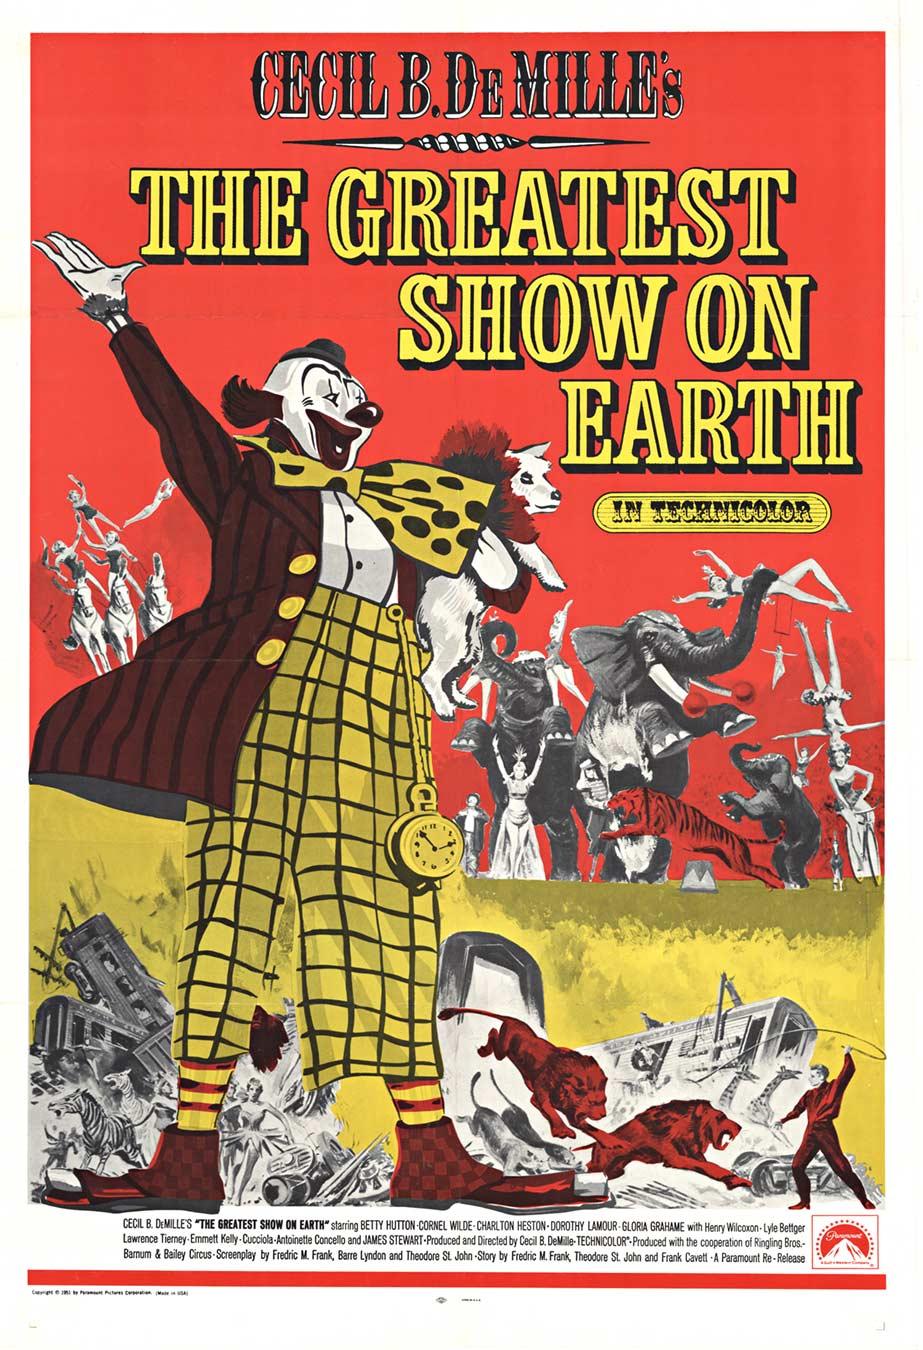 Figurative Print Unknown - Original "The Greatest Show on Earth" 1951 vintage movie poster US 1-sheet